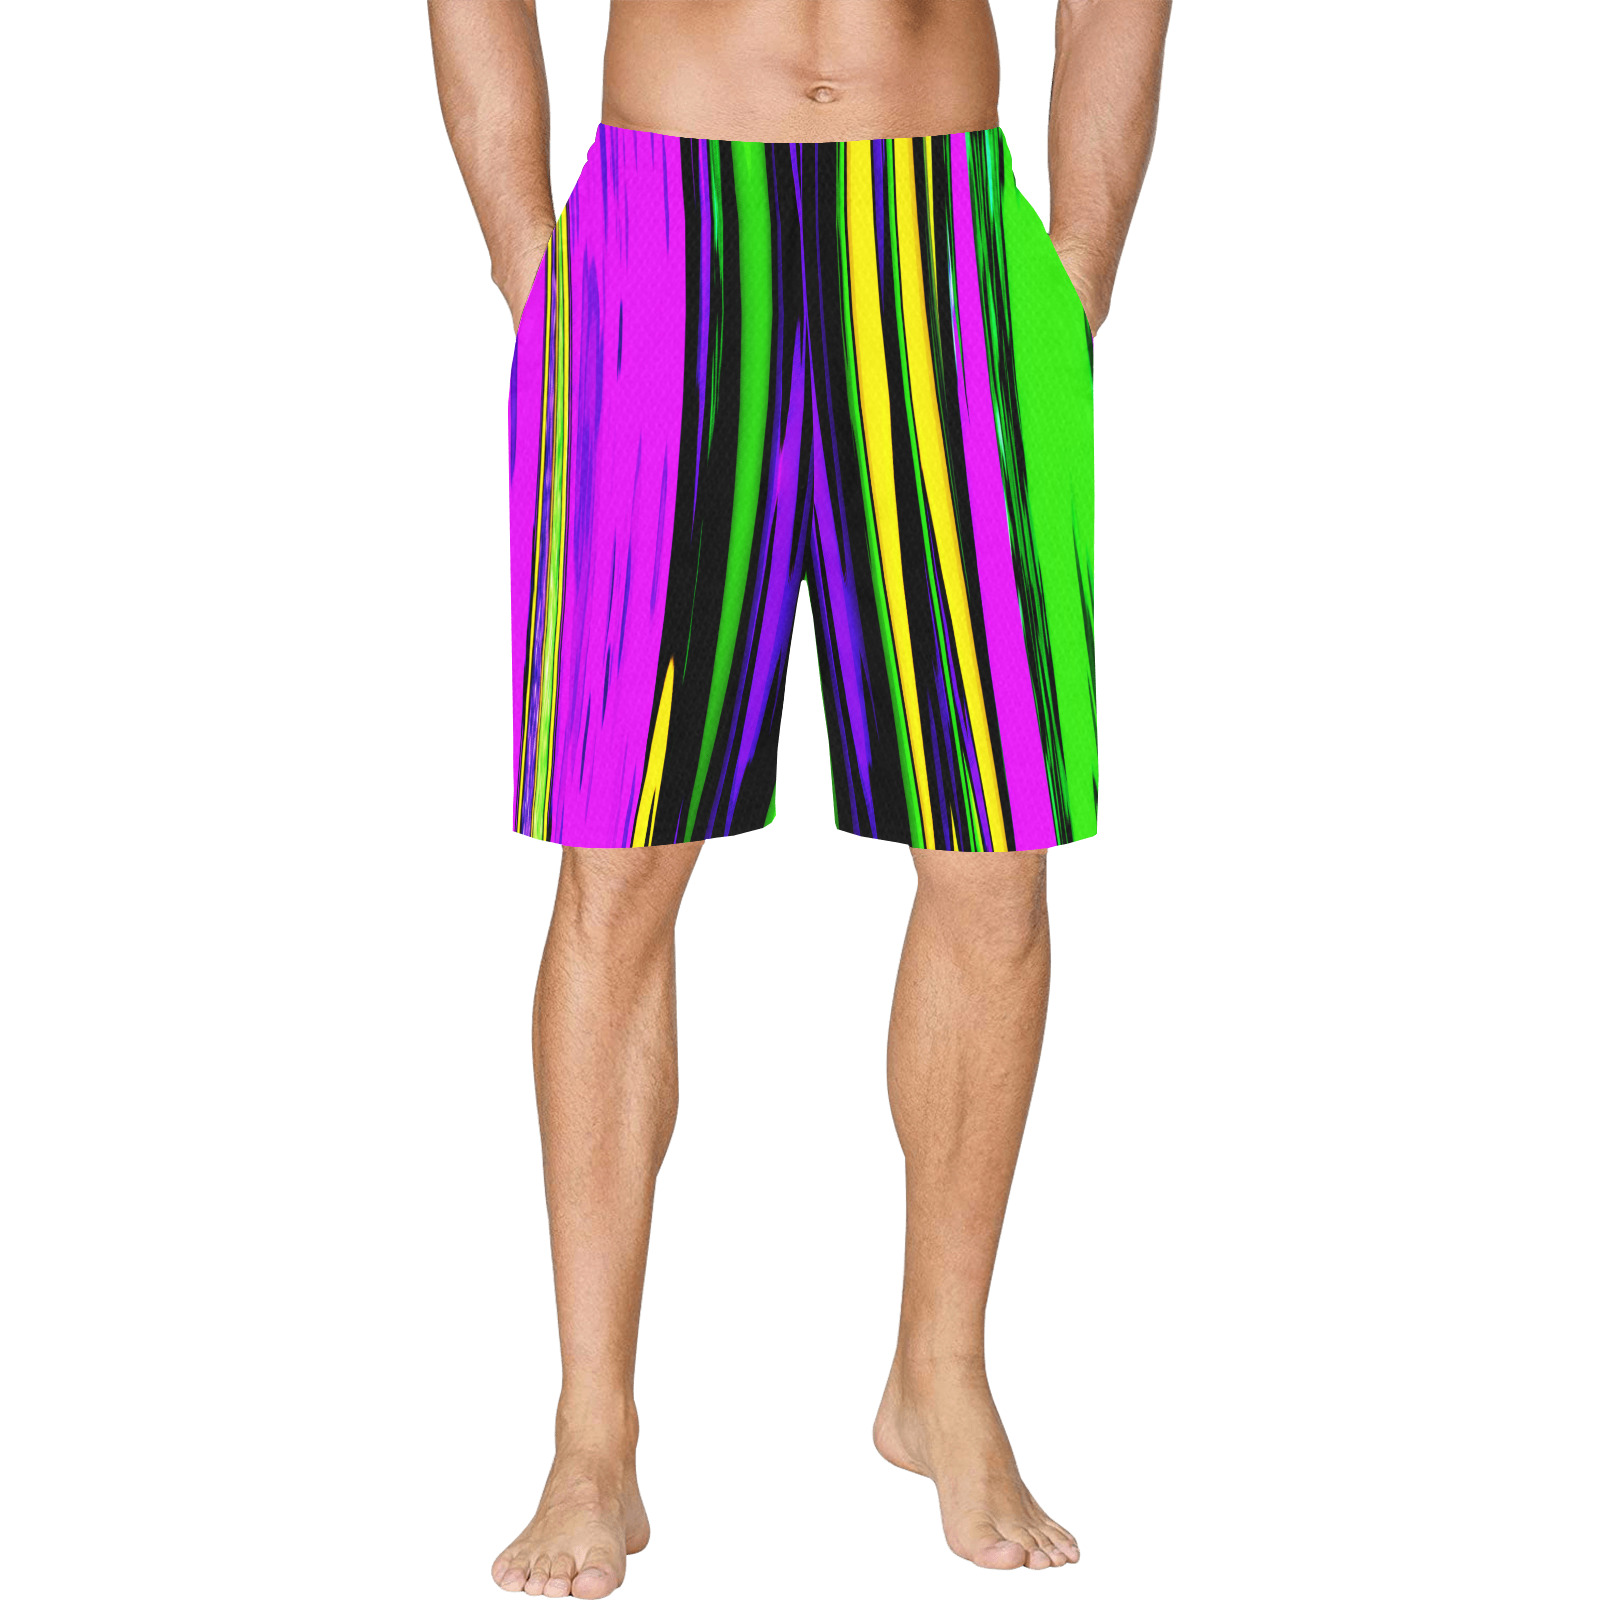 Mardi Gras Stripes All Over Print Basketball Shorts with Pocket